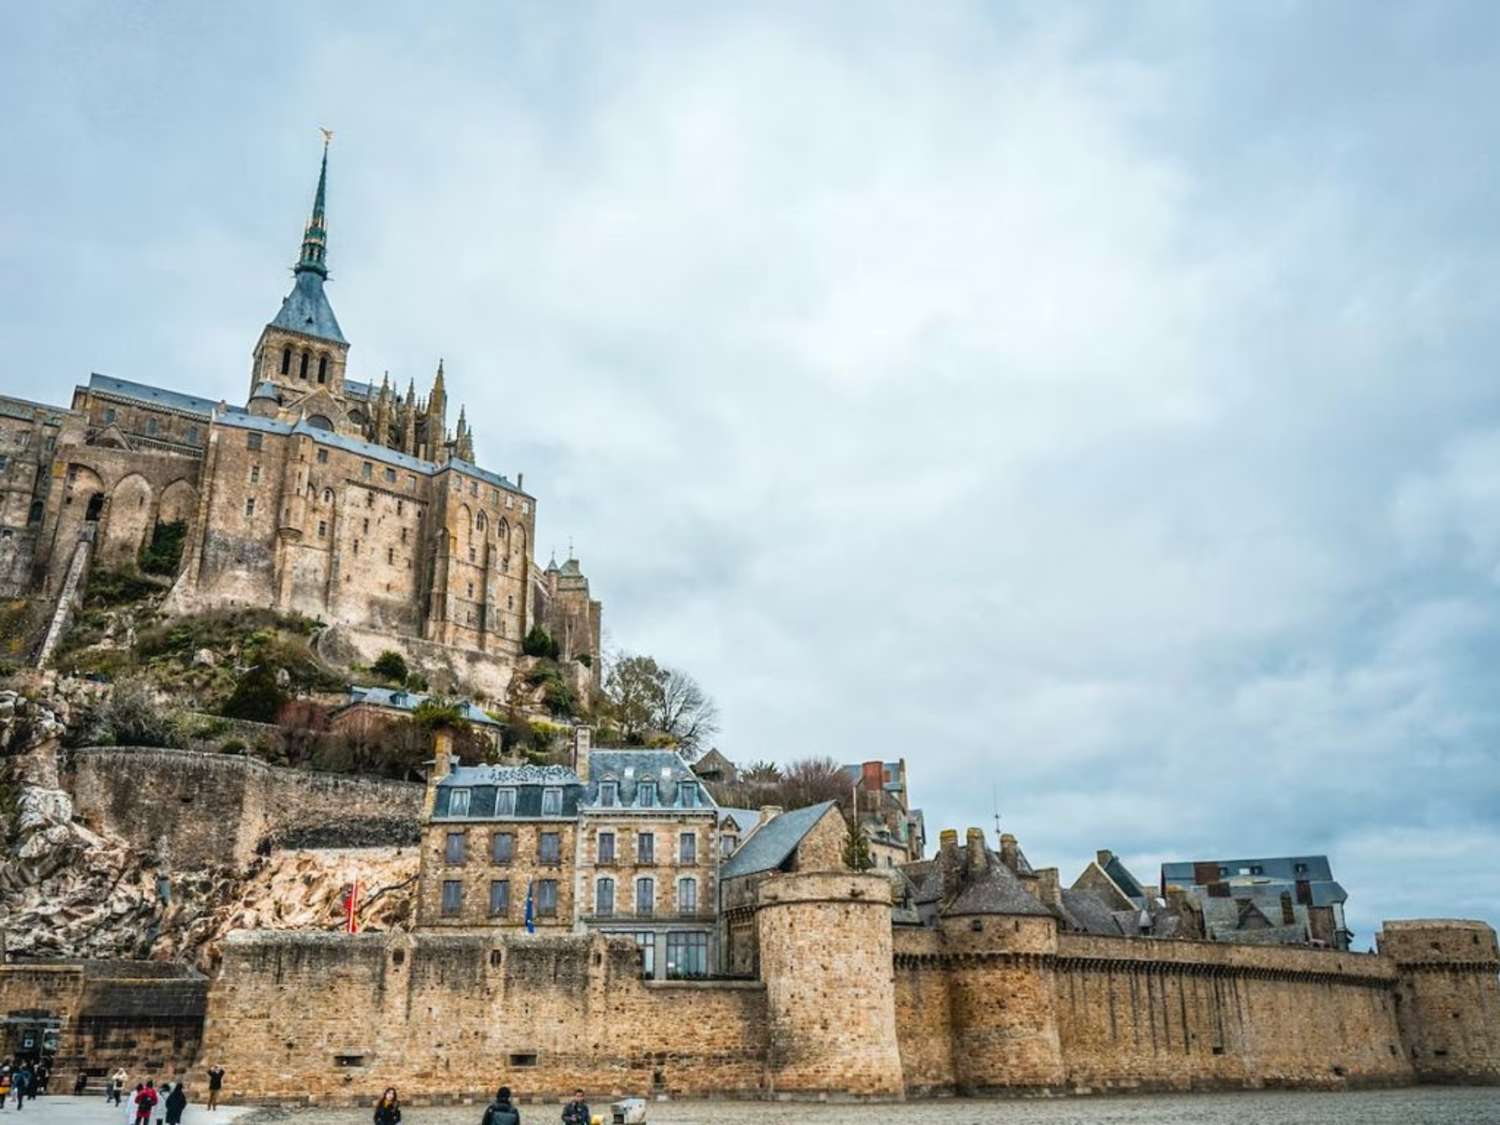 Le-Mont-Saint-Michel is so amazing and breathtaking. : r/travel